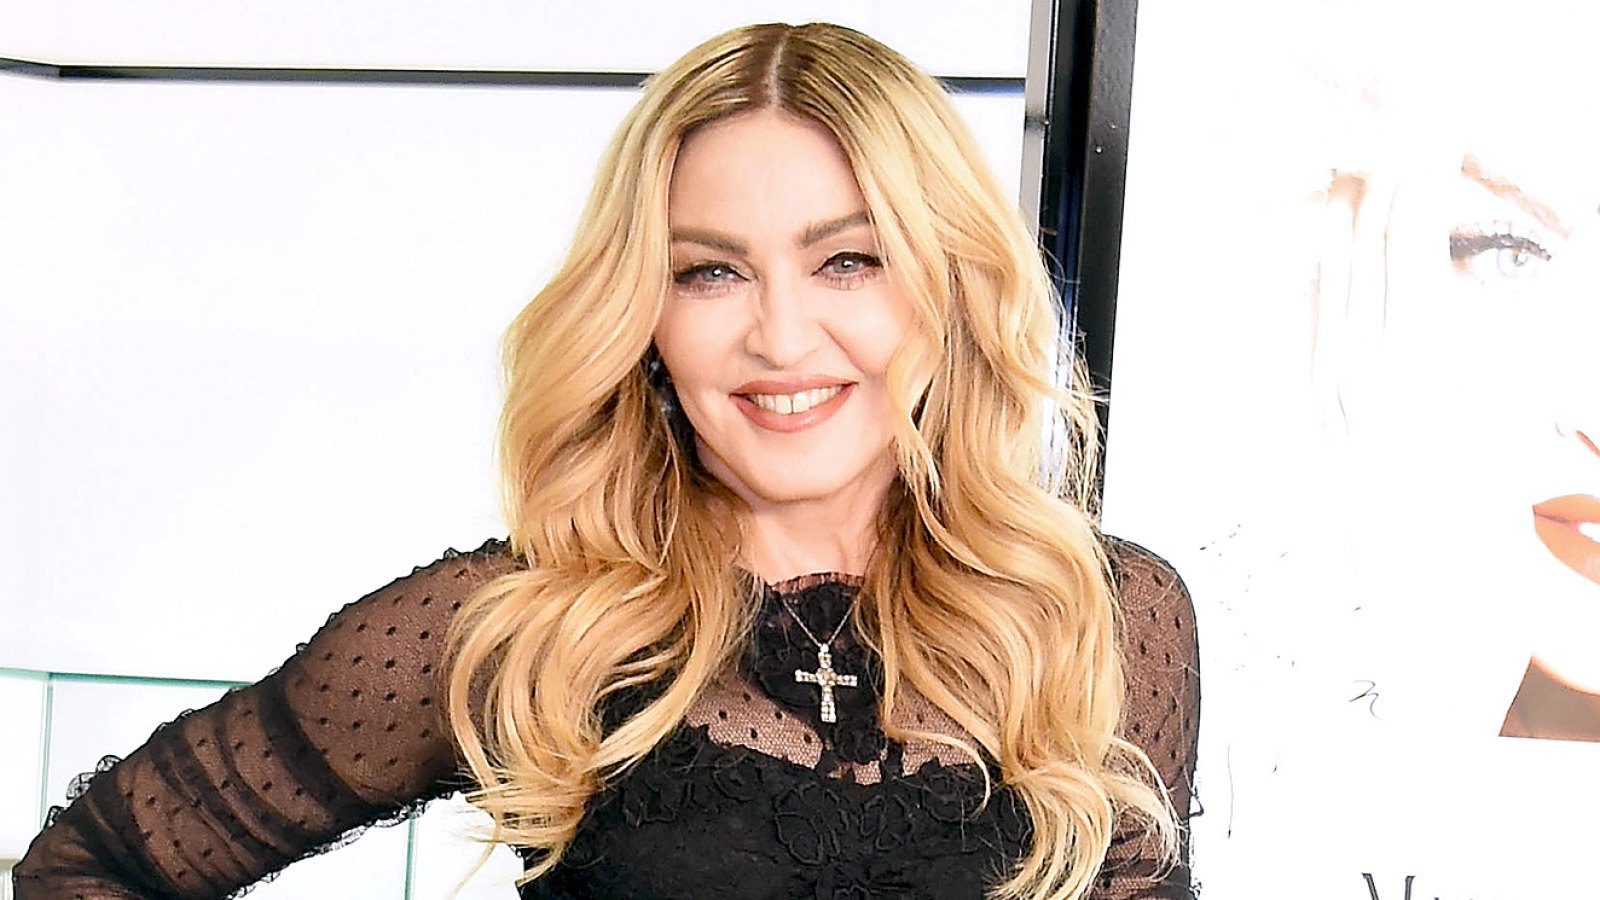 Madonna attends the promotional event for "MDNA SKIN" on February 15, 2016 in Tokyo, Japan.